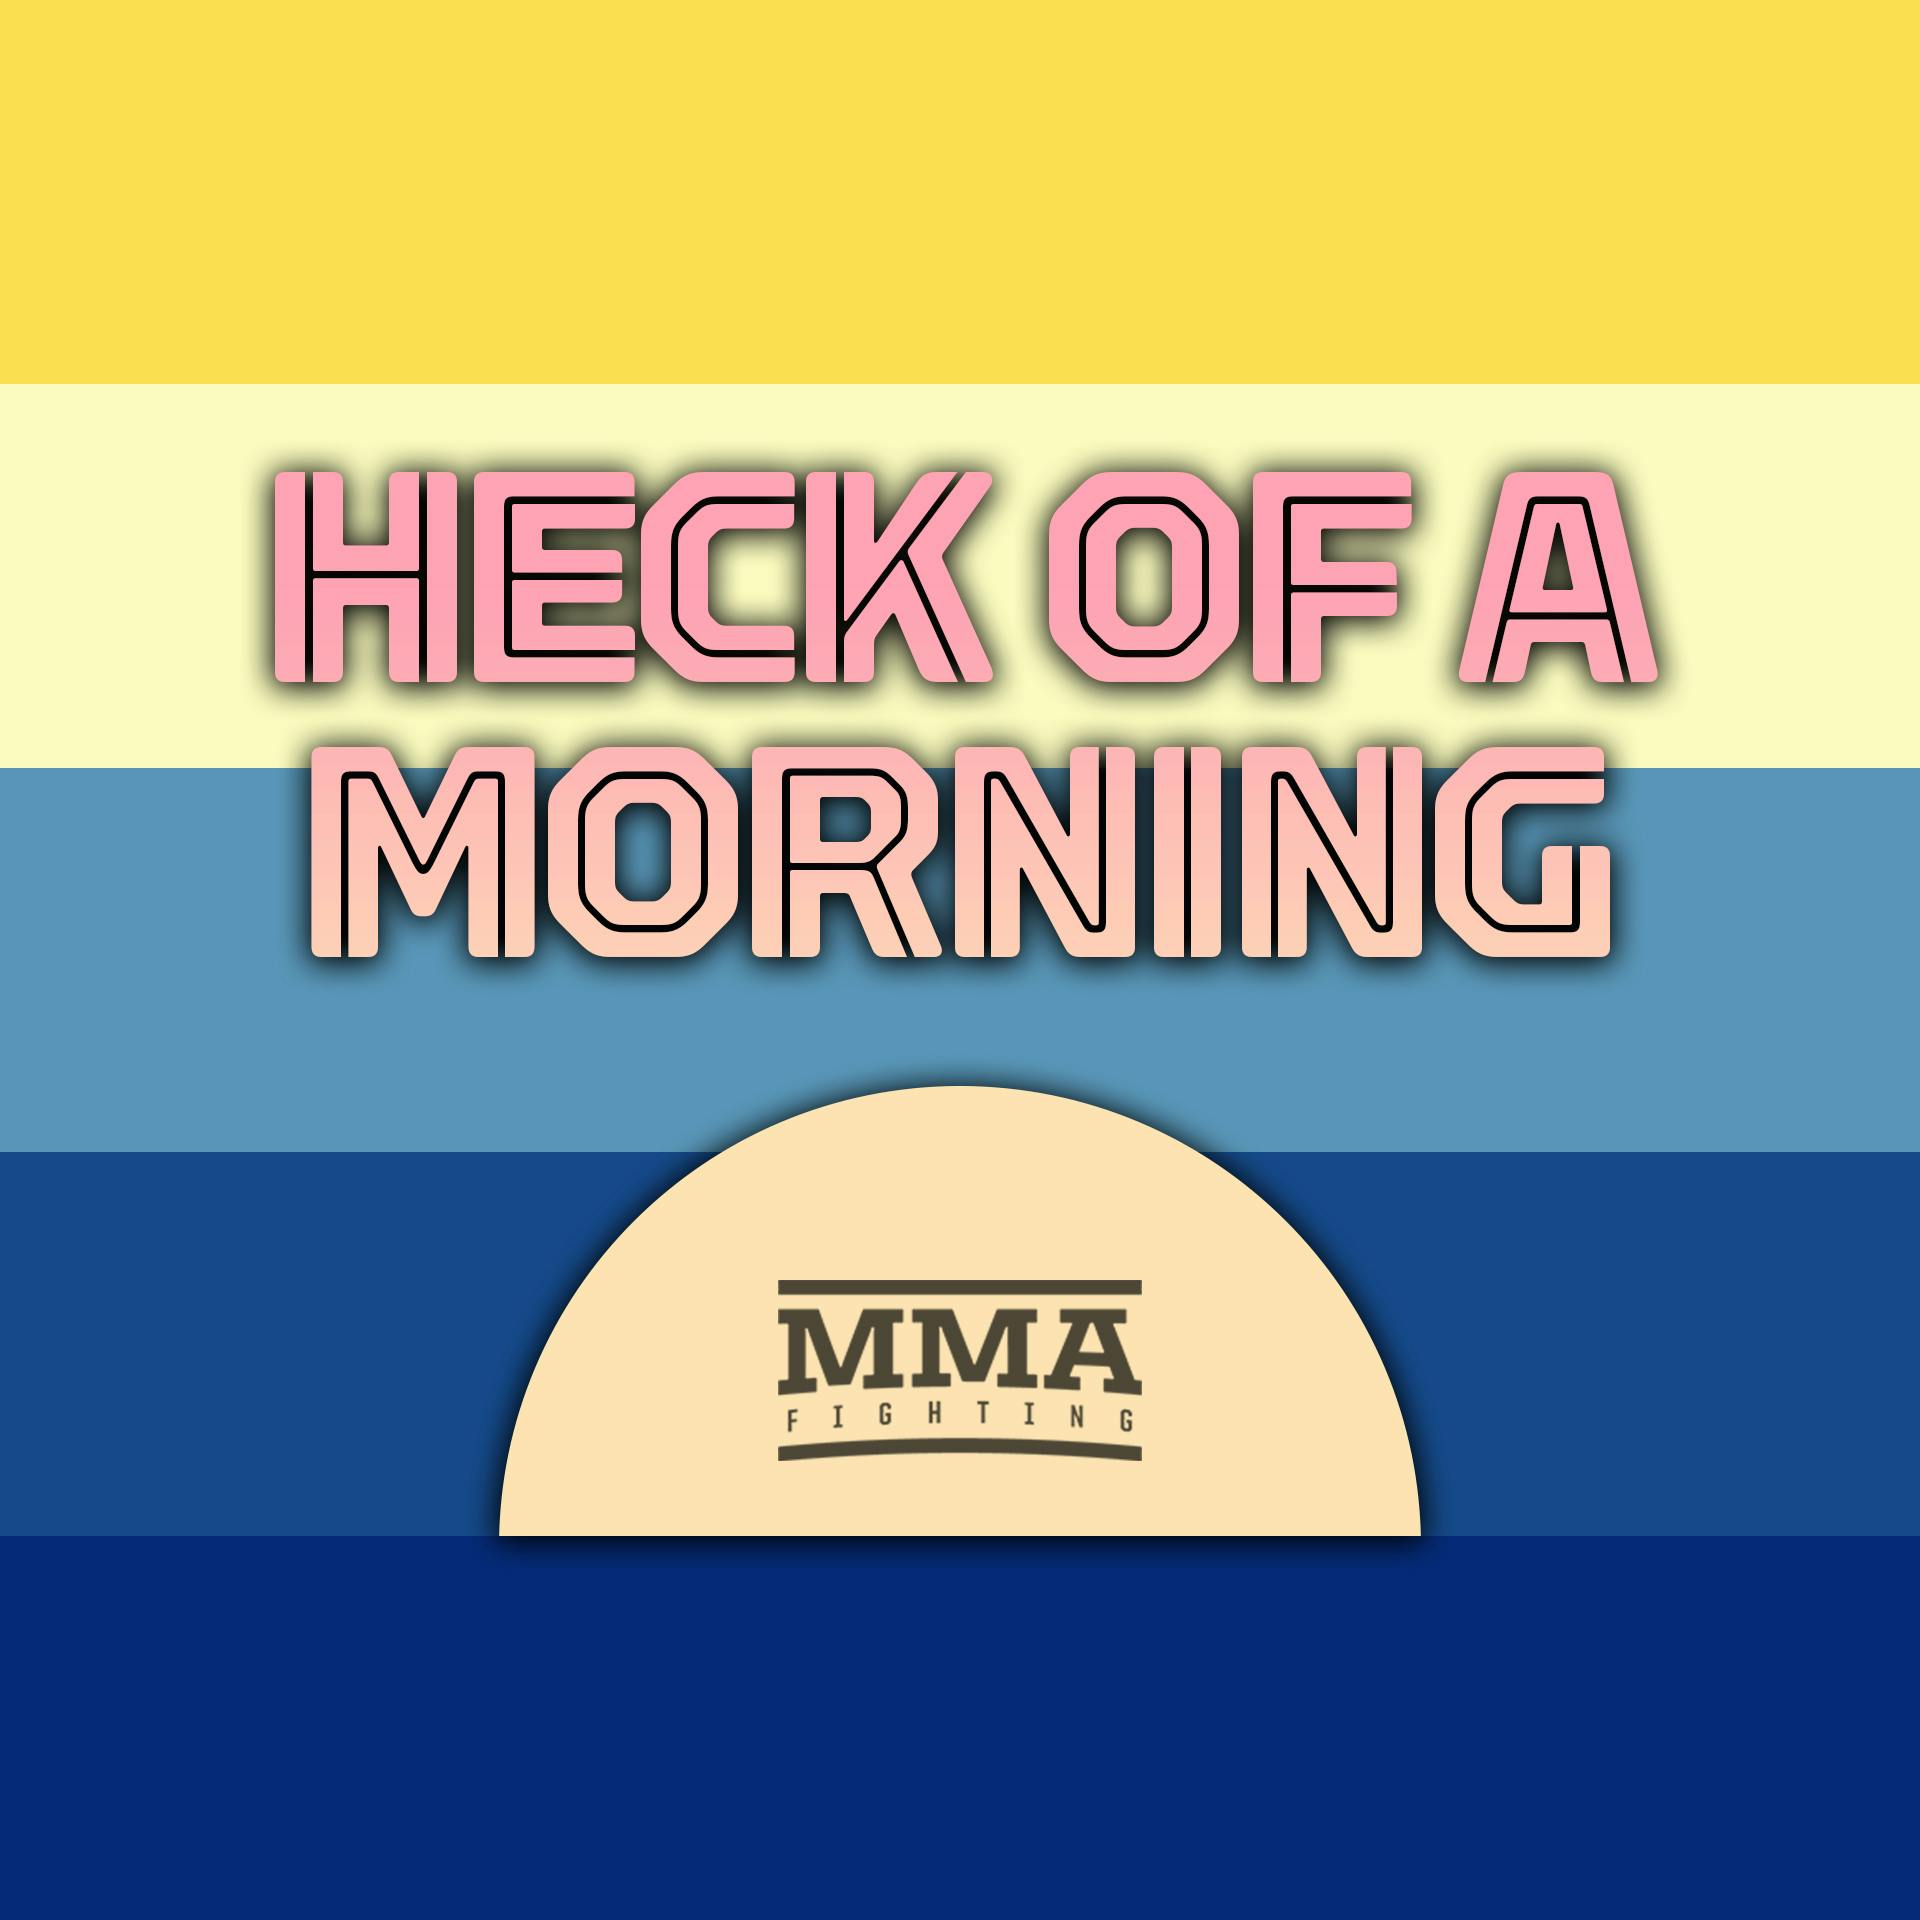 Heck of a Morning | Open Scoring Debate Continues On, Holly Holm Wasn't Robbed, the Good (and the Bad) of Eagle FC 47